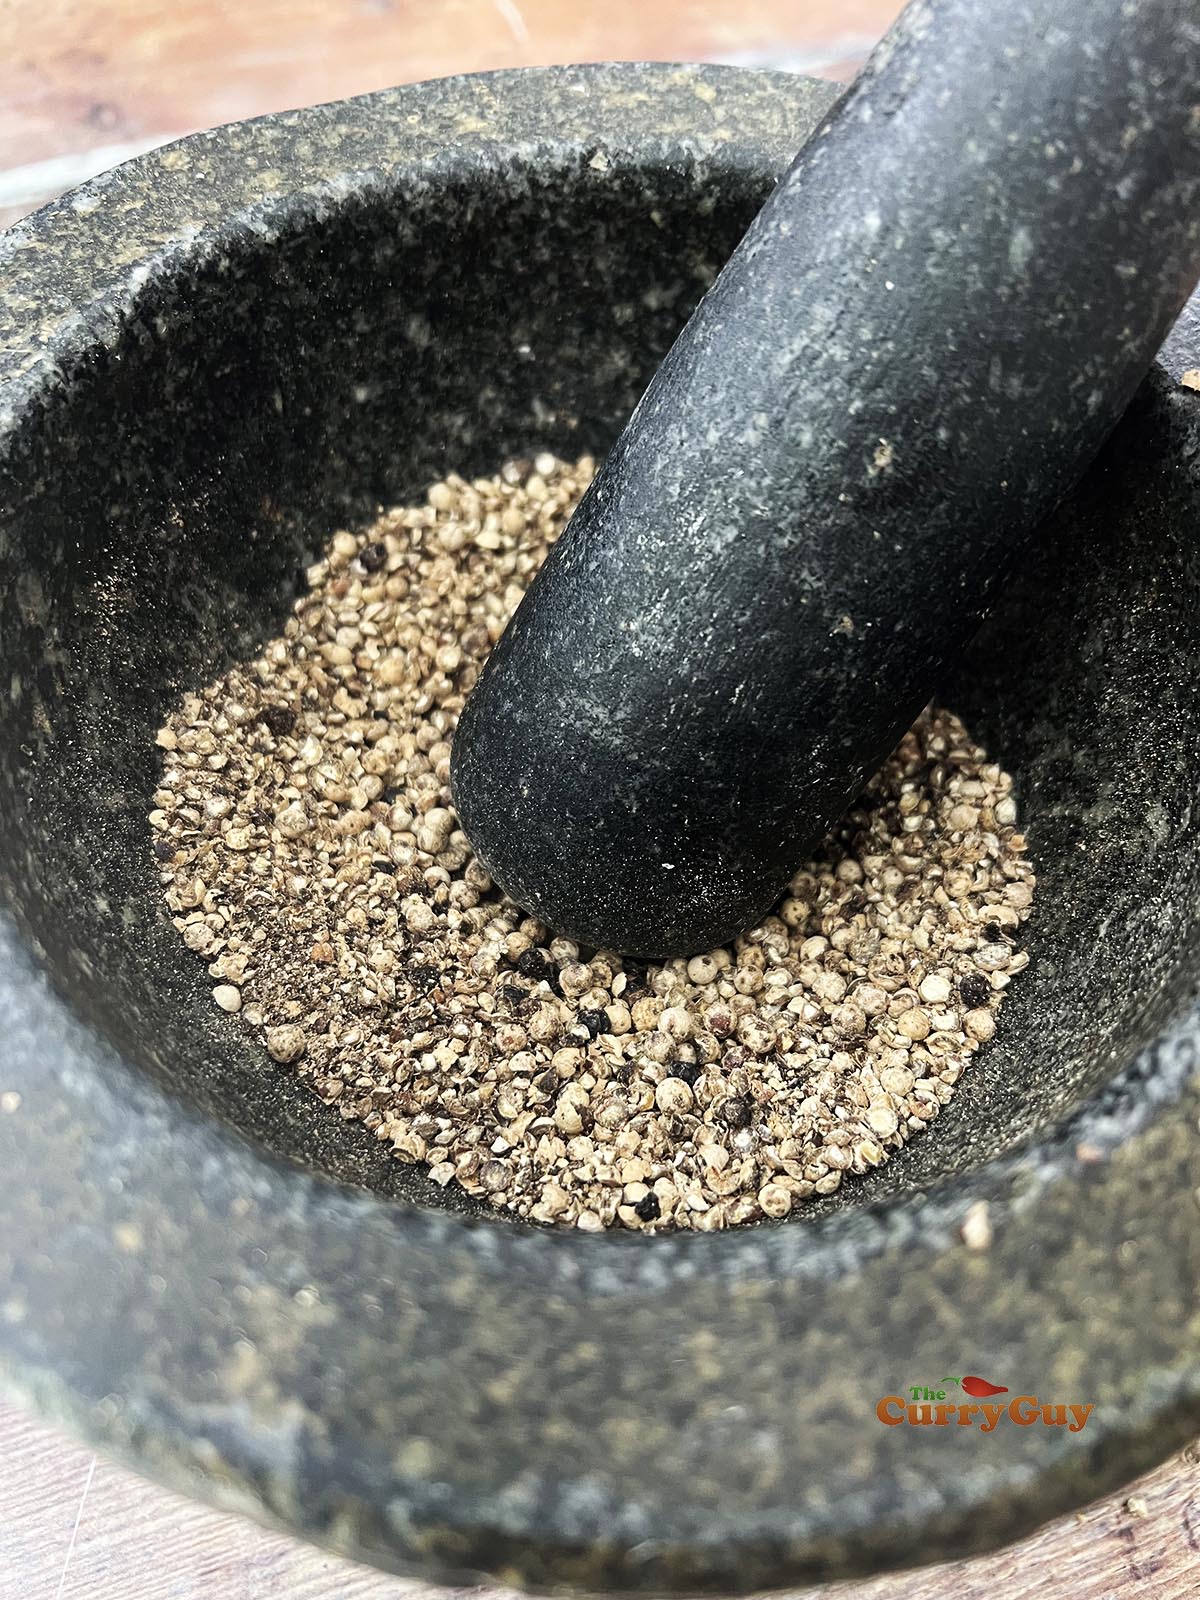 Grinding white and black peppercorns